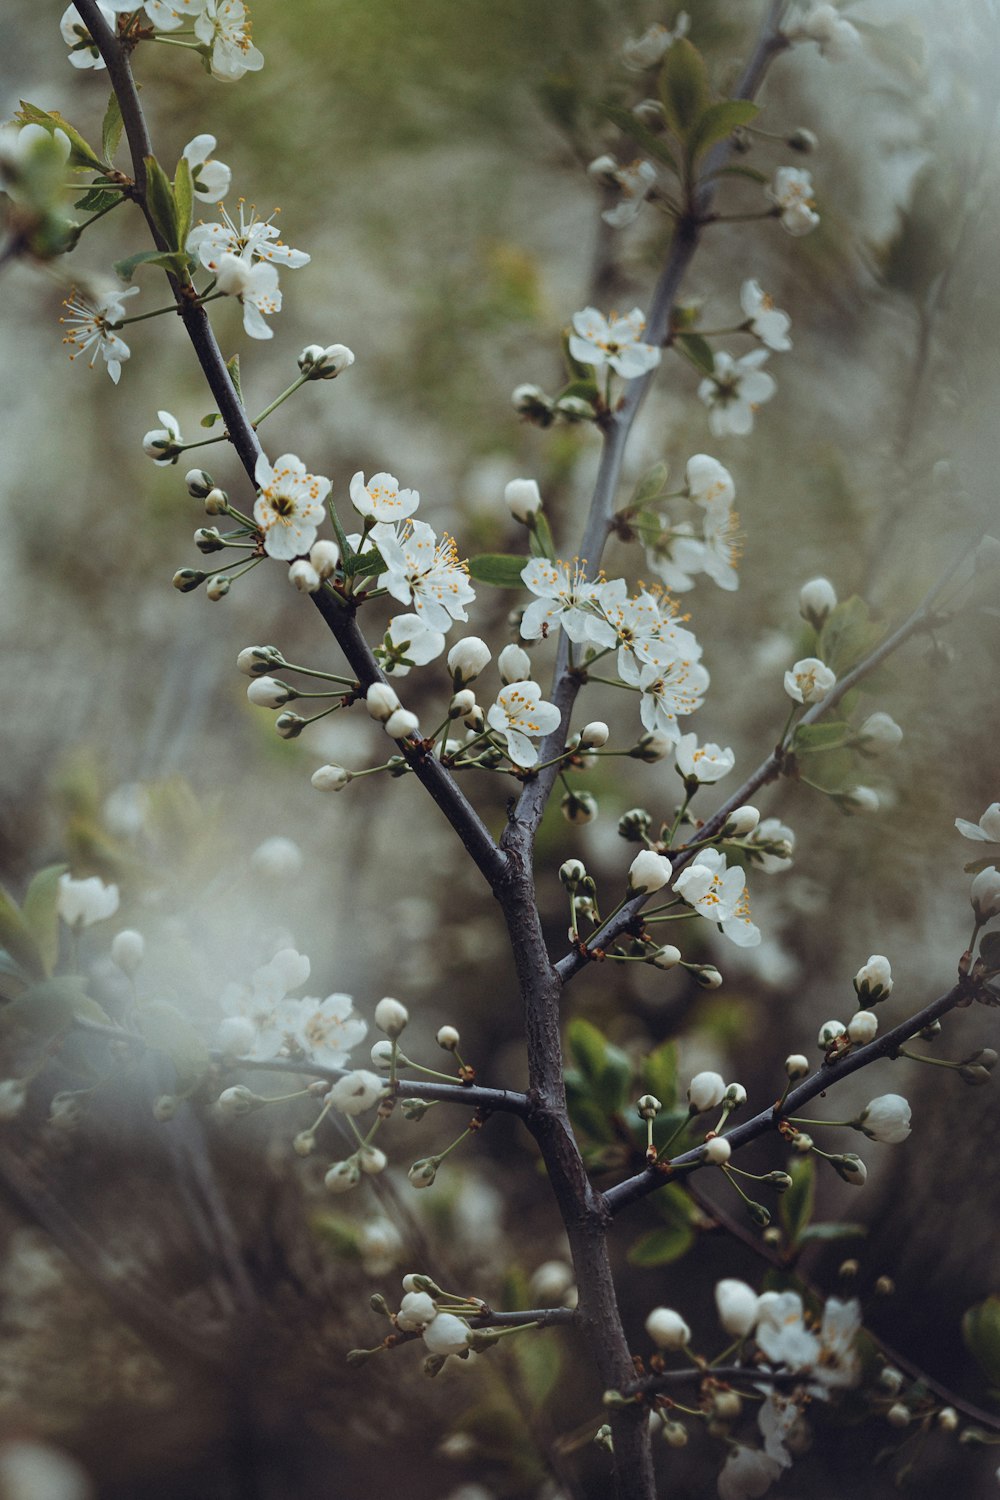 a branch with white flowers in a blurry photo